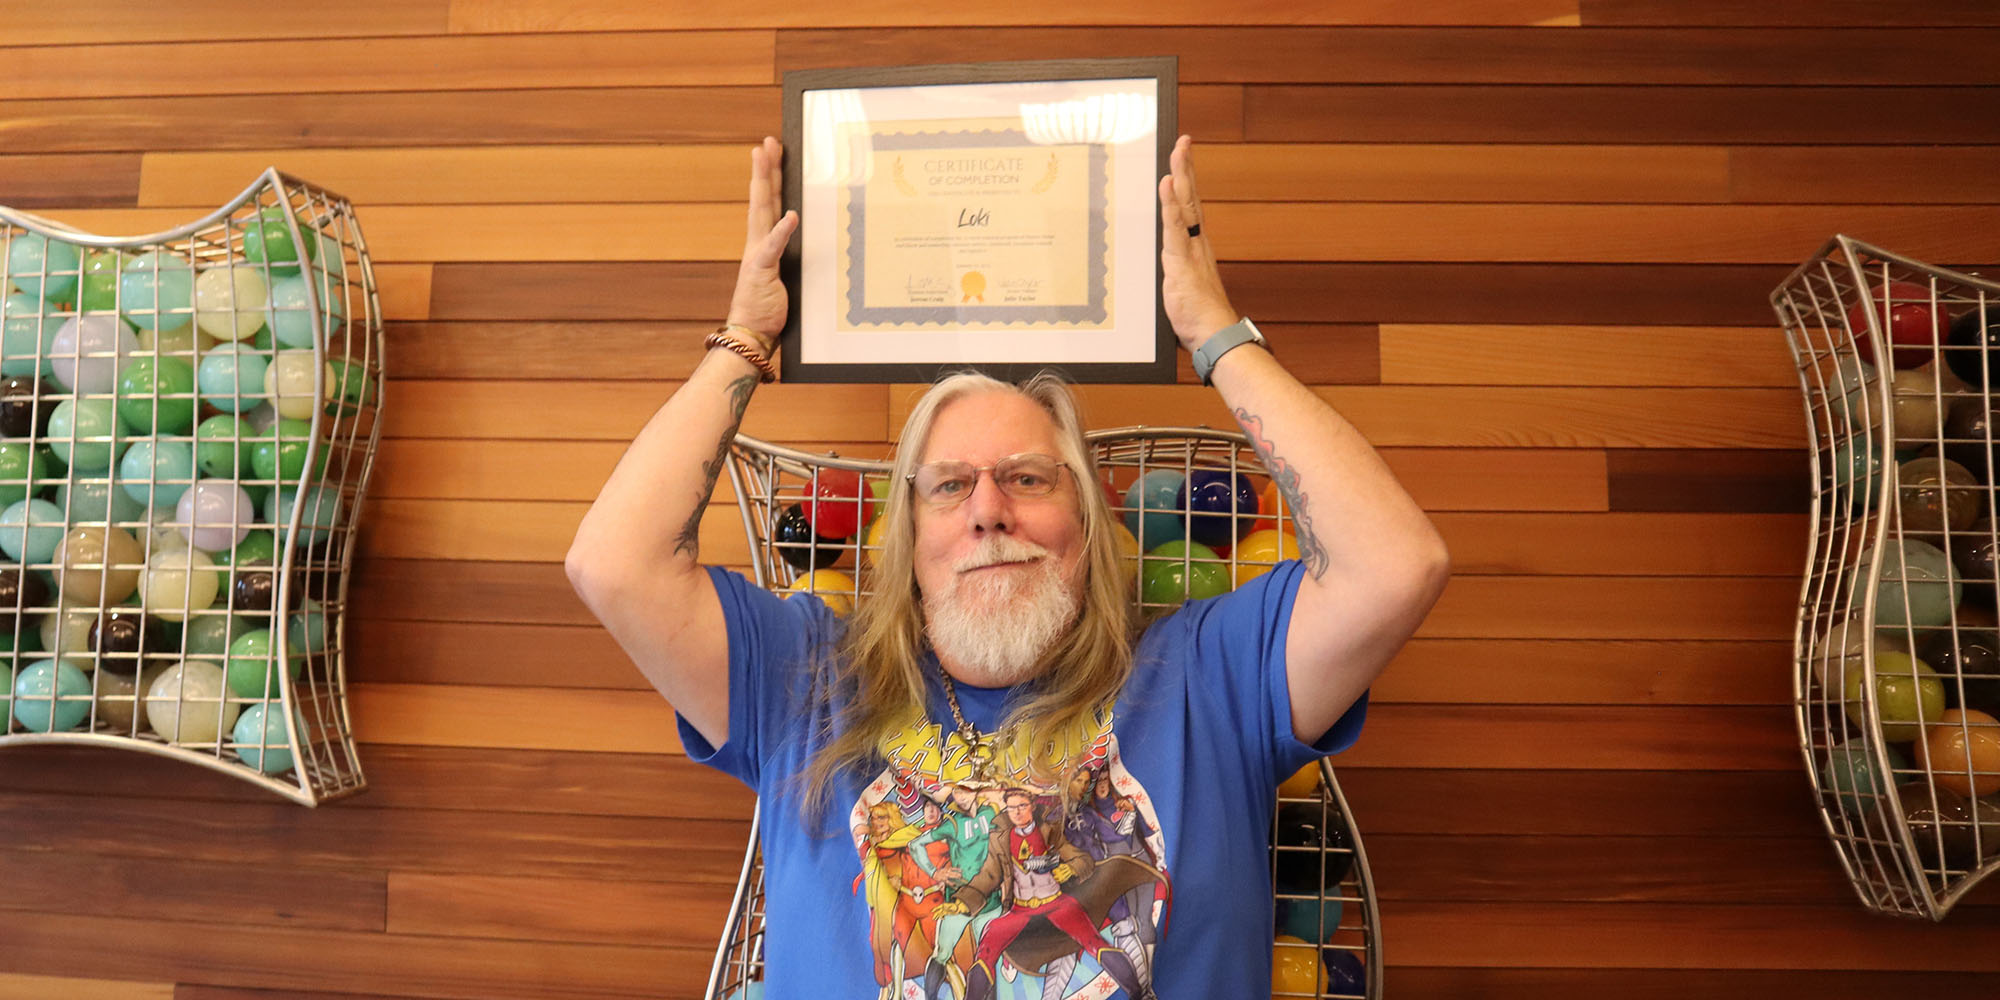 Photo of a man with long hair and a beard holding a graduation certificate above his head, in front of a wood wall.